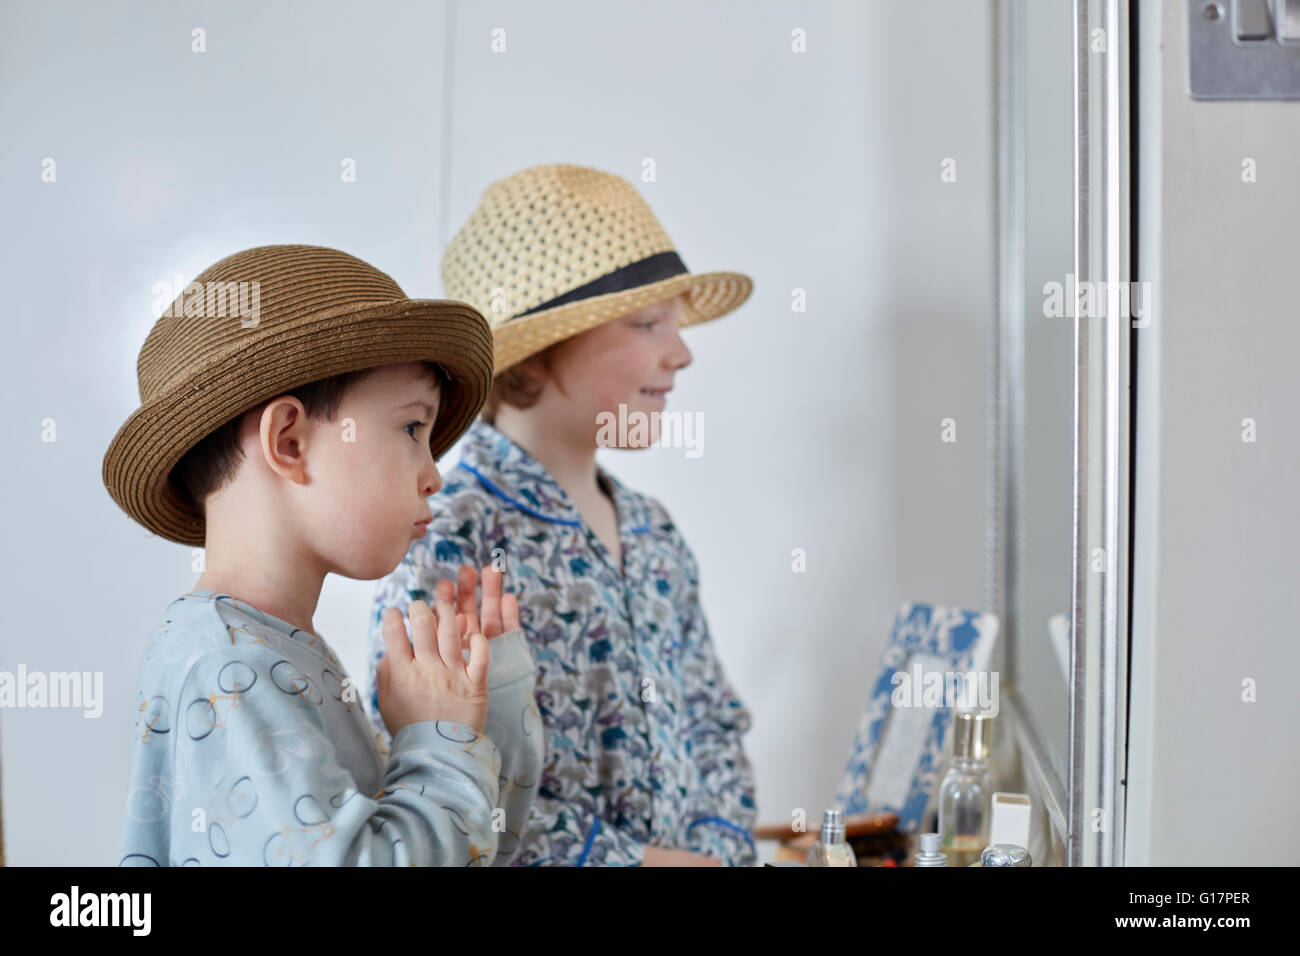 Boys playing dress-up in bedroom Stock Photo